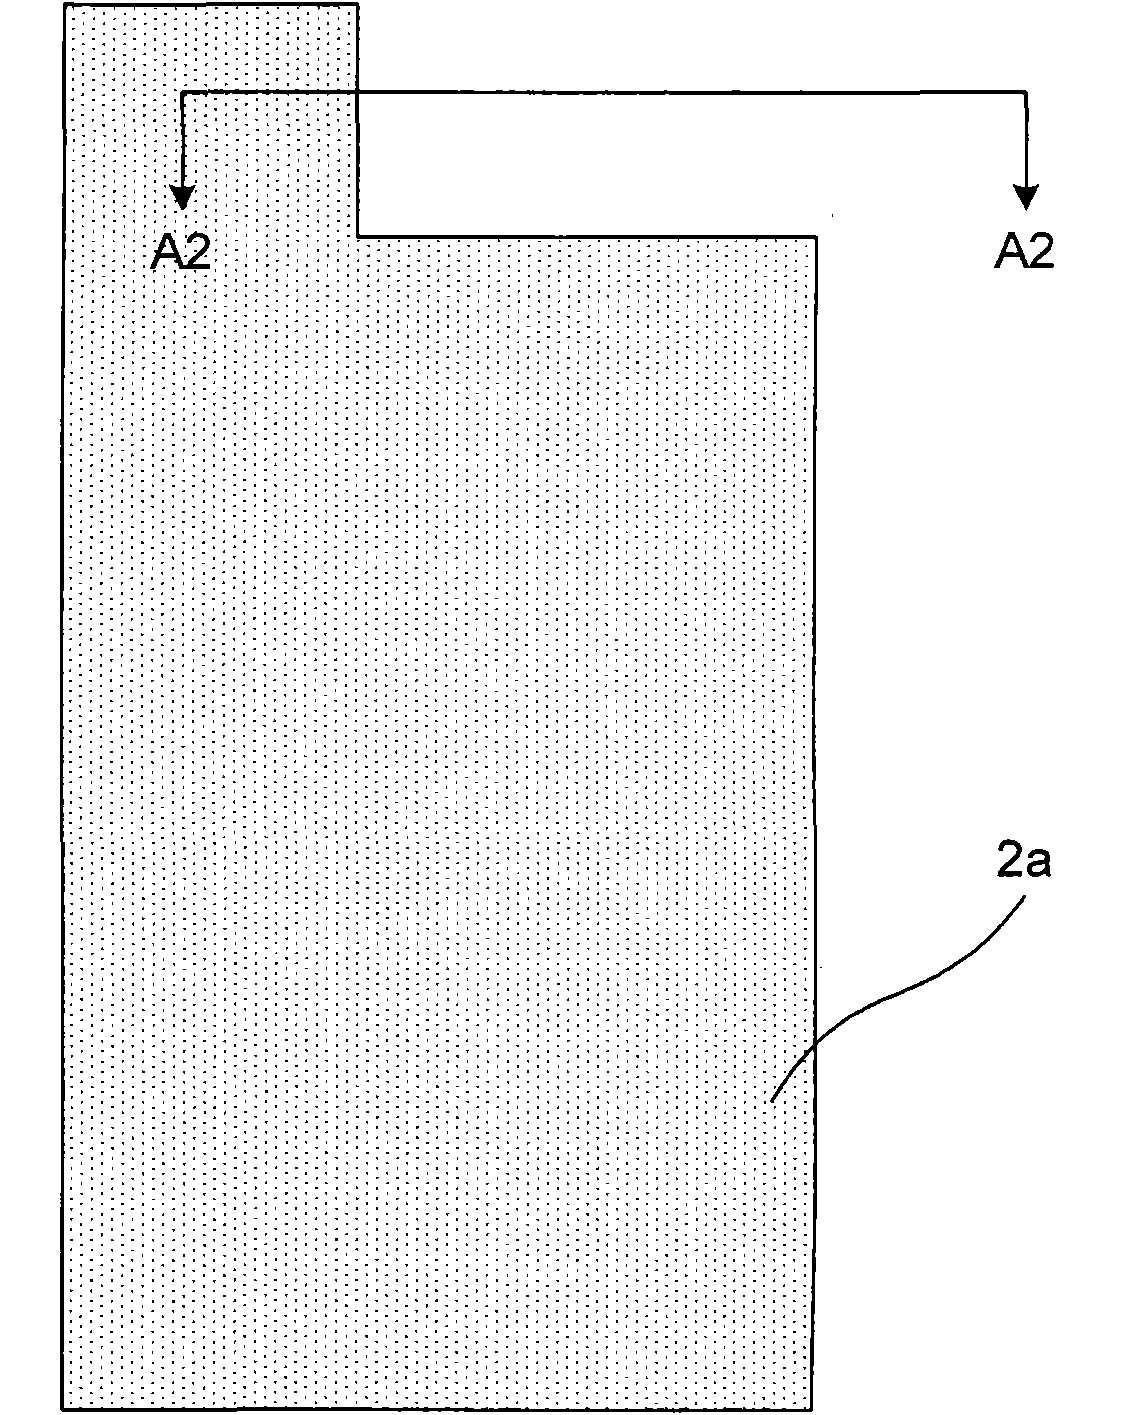 FFS (Fringe Field Switching) type TFT-LCD (Thin Film Transistor-Liquid Crystal Display) array substrate and manufacturing method thereof